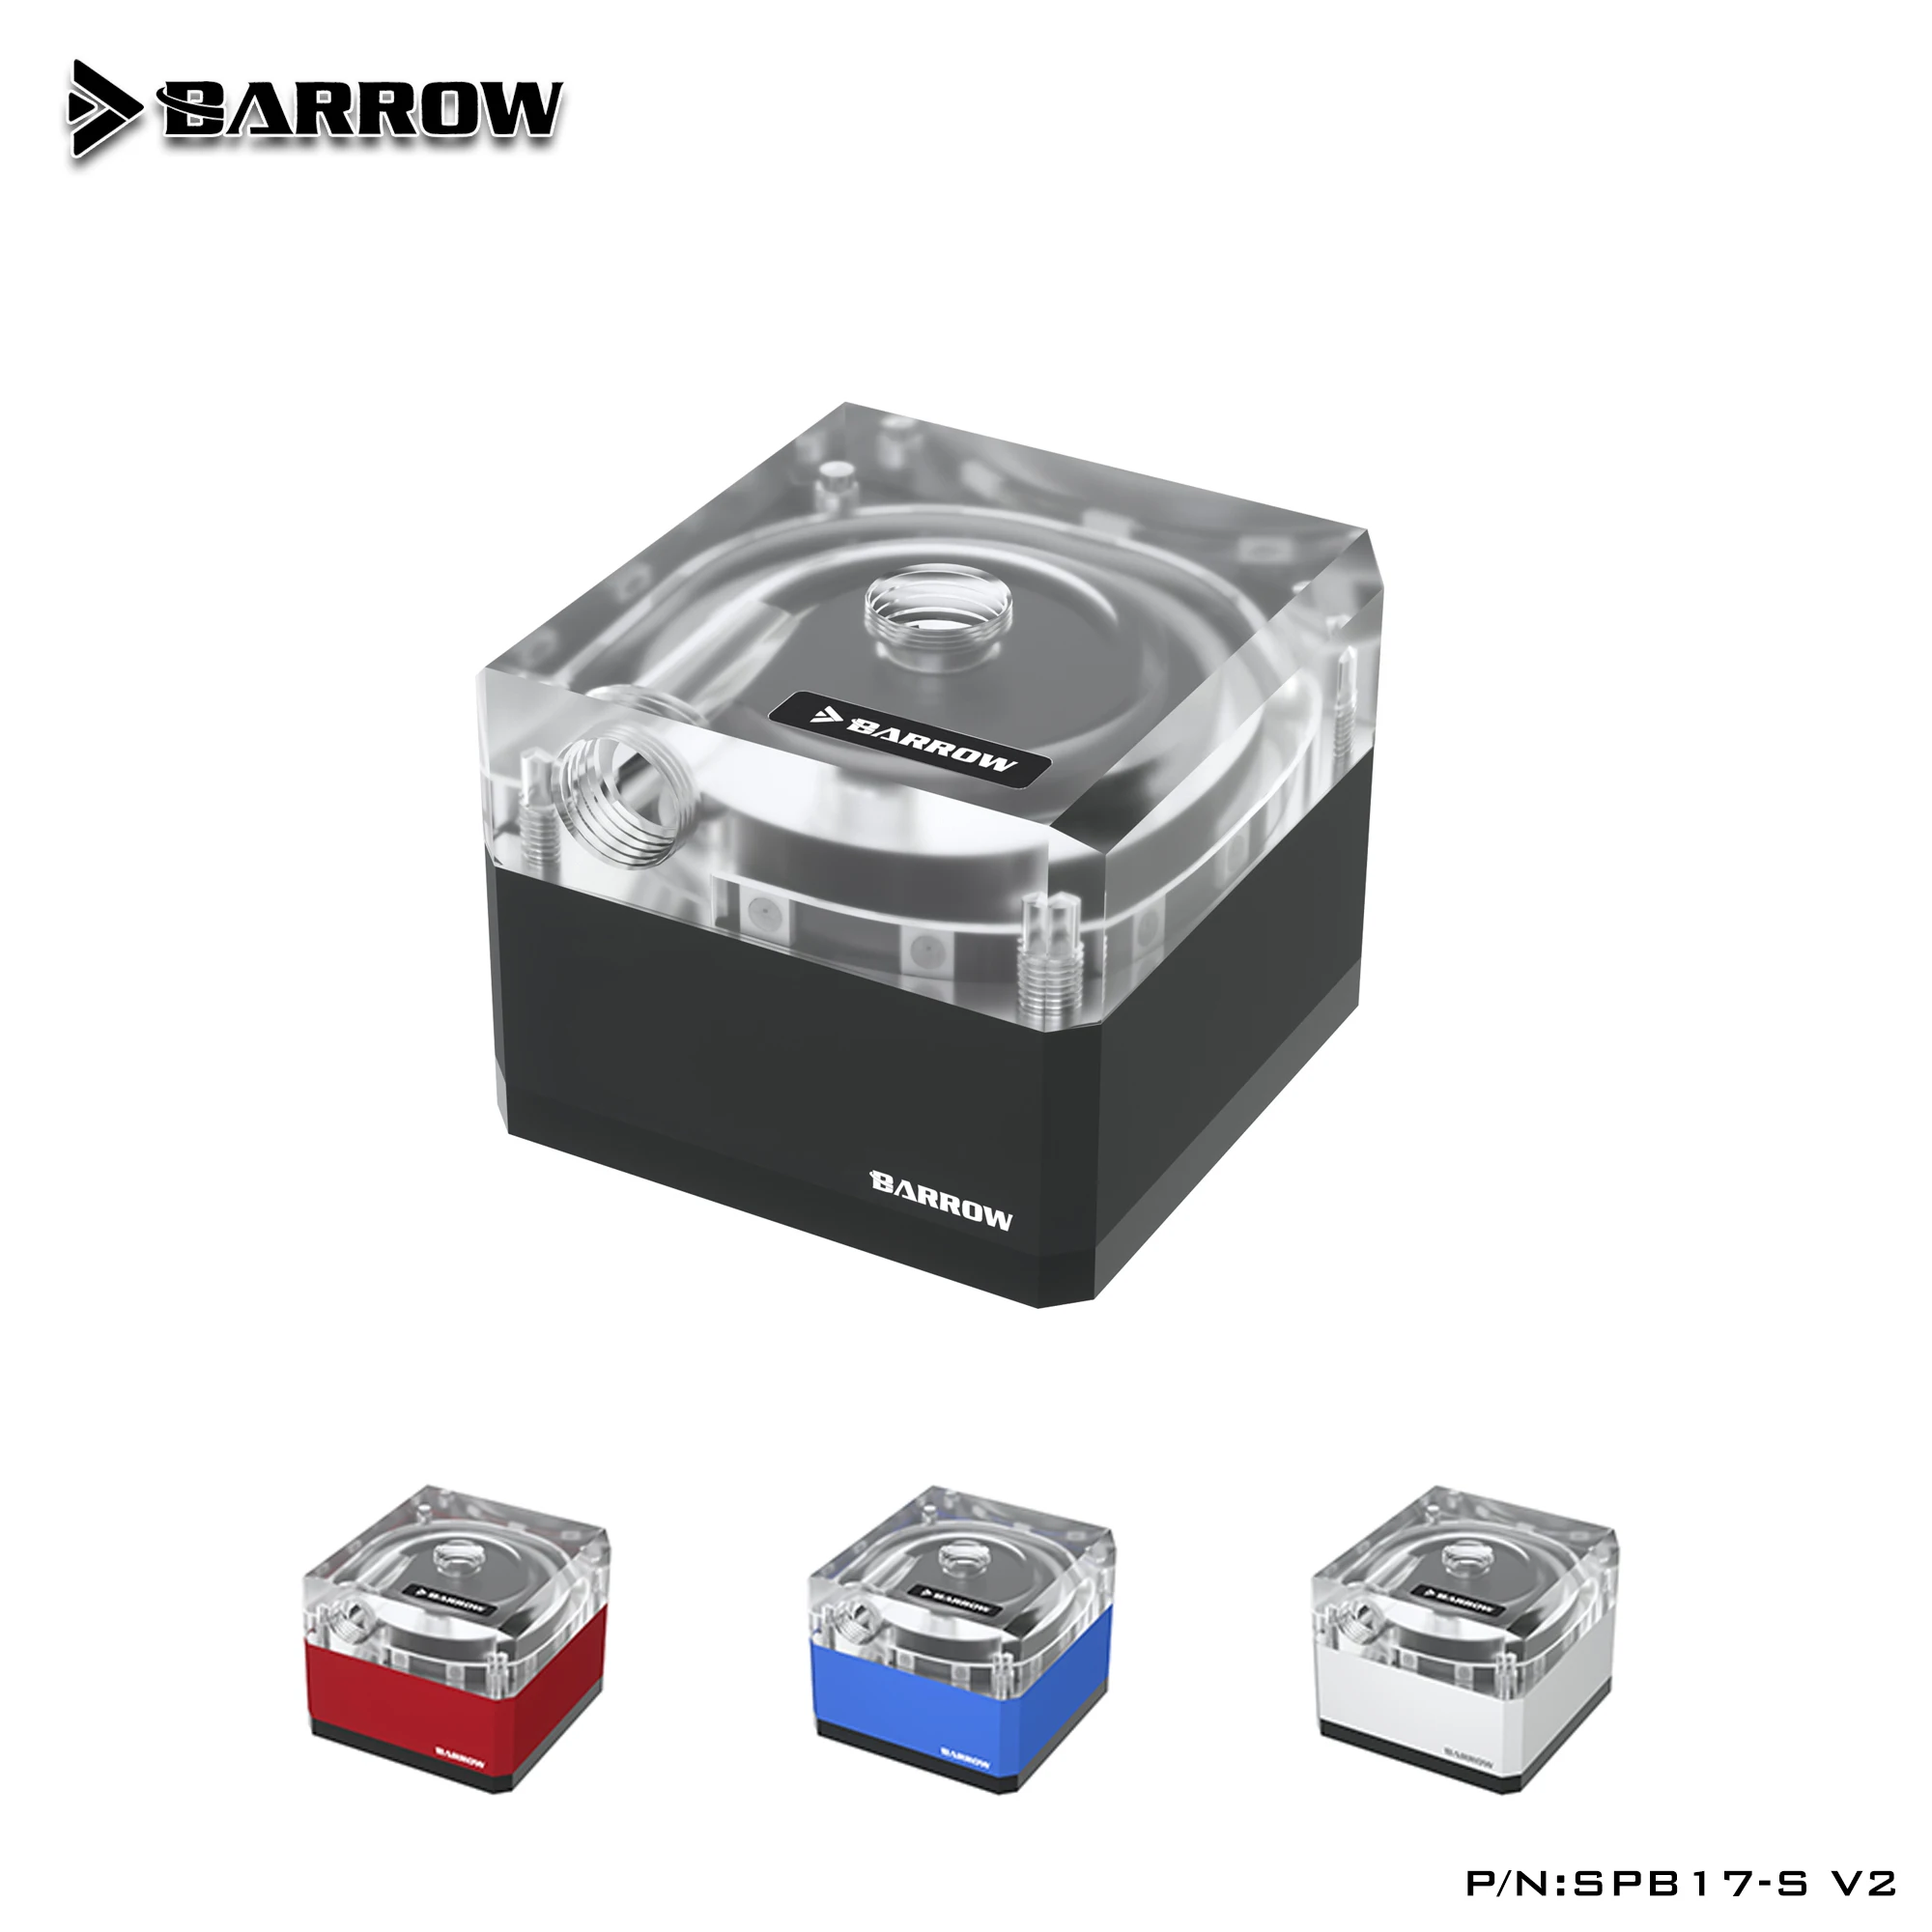 Barrow  DDC 17W PWM PCWater Cooler Pump DV12 Maximum Flow Lift 5.5 Meters 960L/H G1/4 Threaded for Computer Water Cooling System